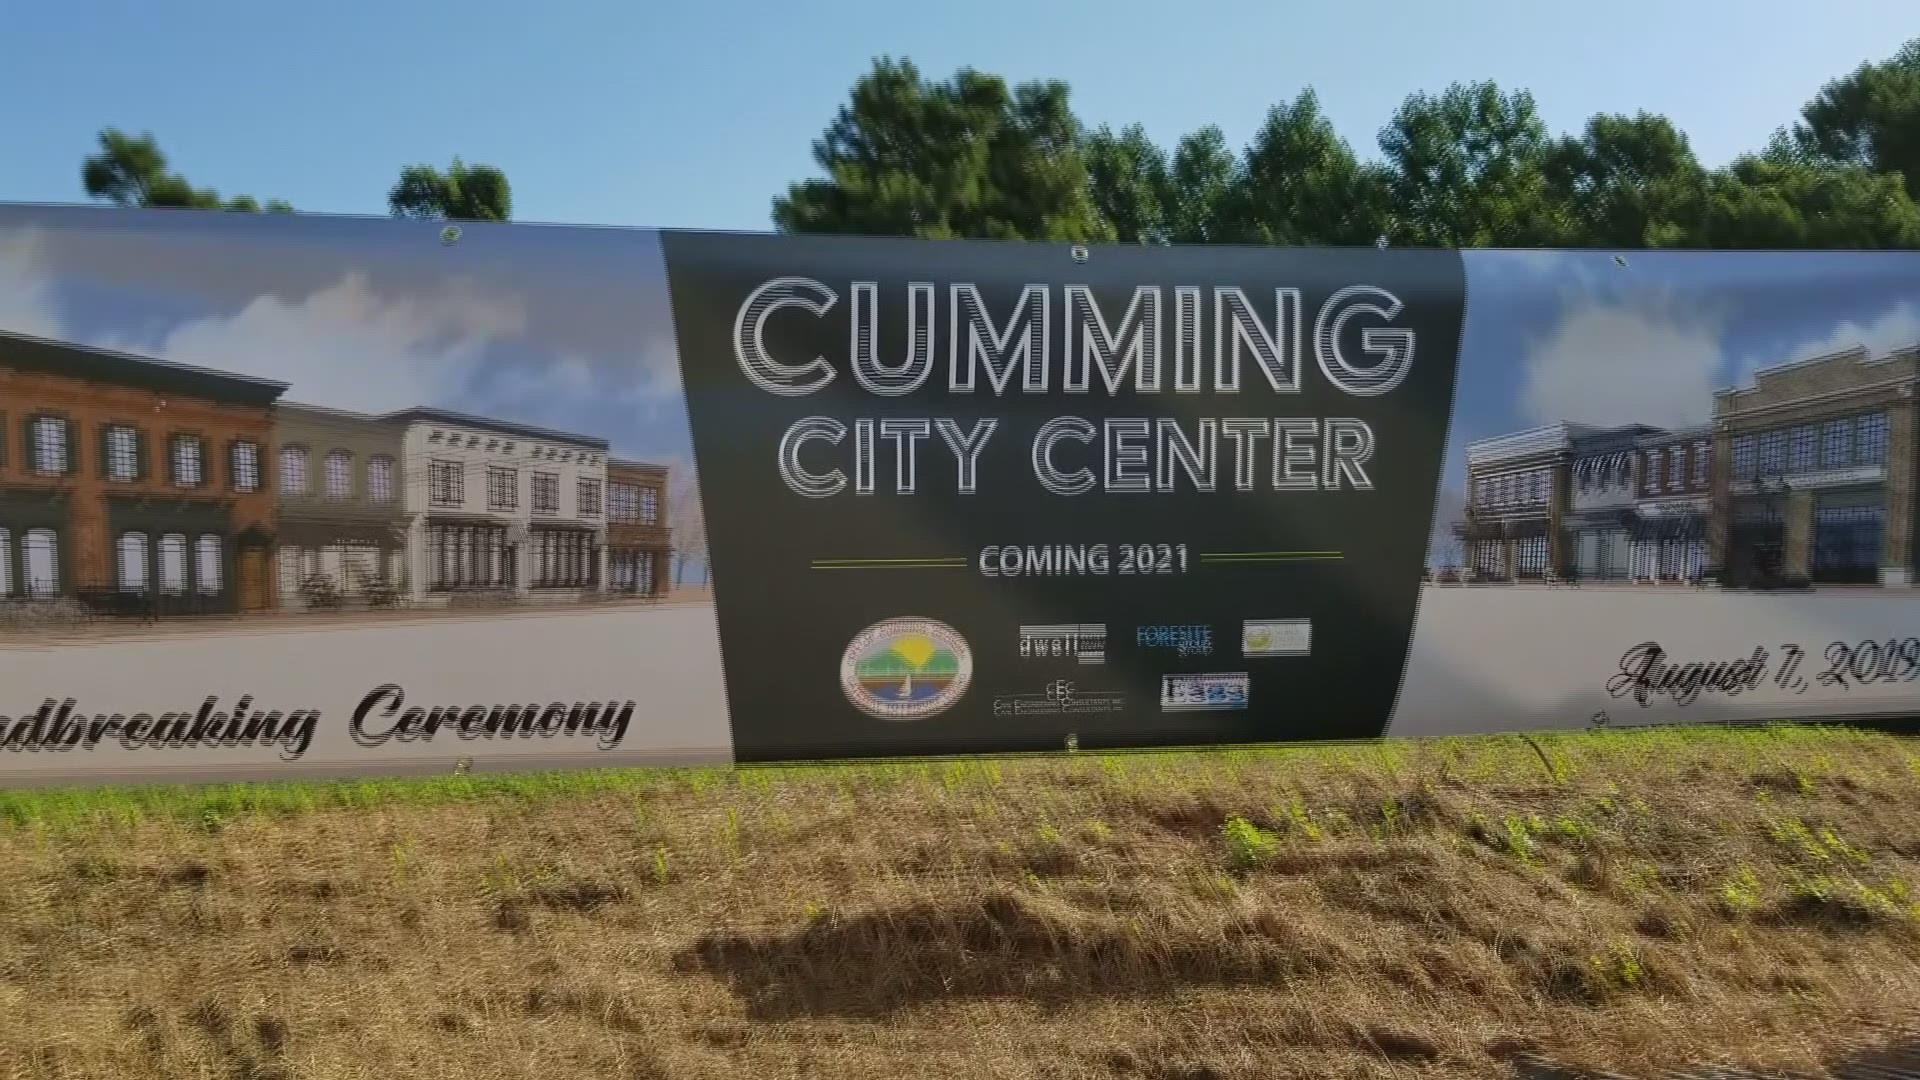 The Cumming City Center broke ground. Another step in the long process from plan to place. Mayor Troy Brumbalow hopes to have a ribbon-cutting and be open for business within two years.